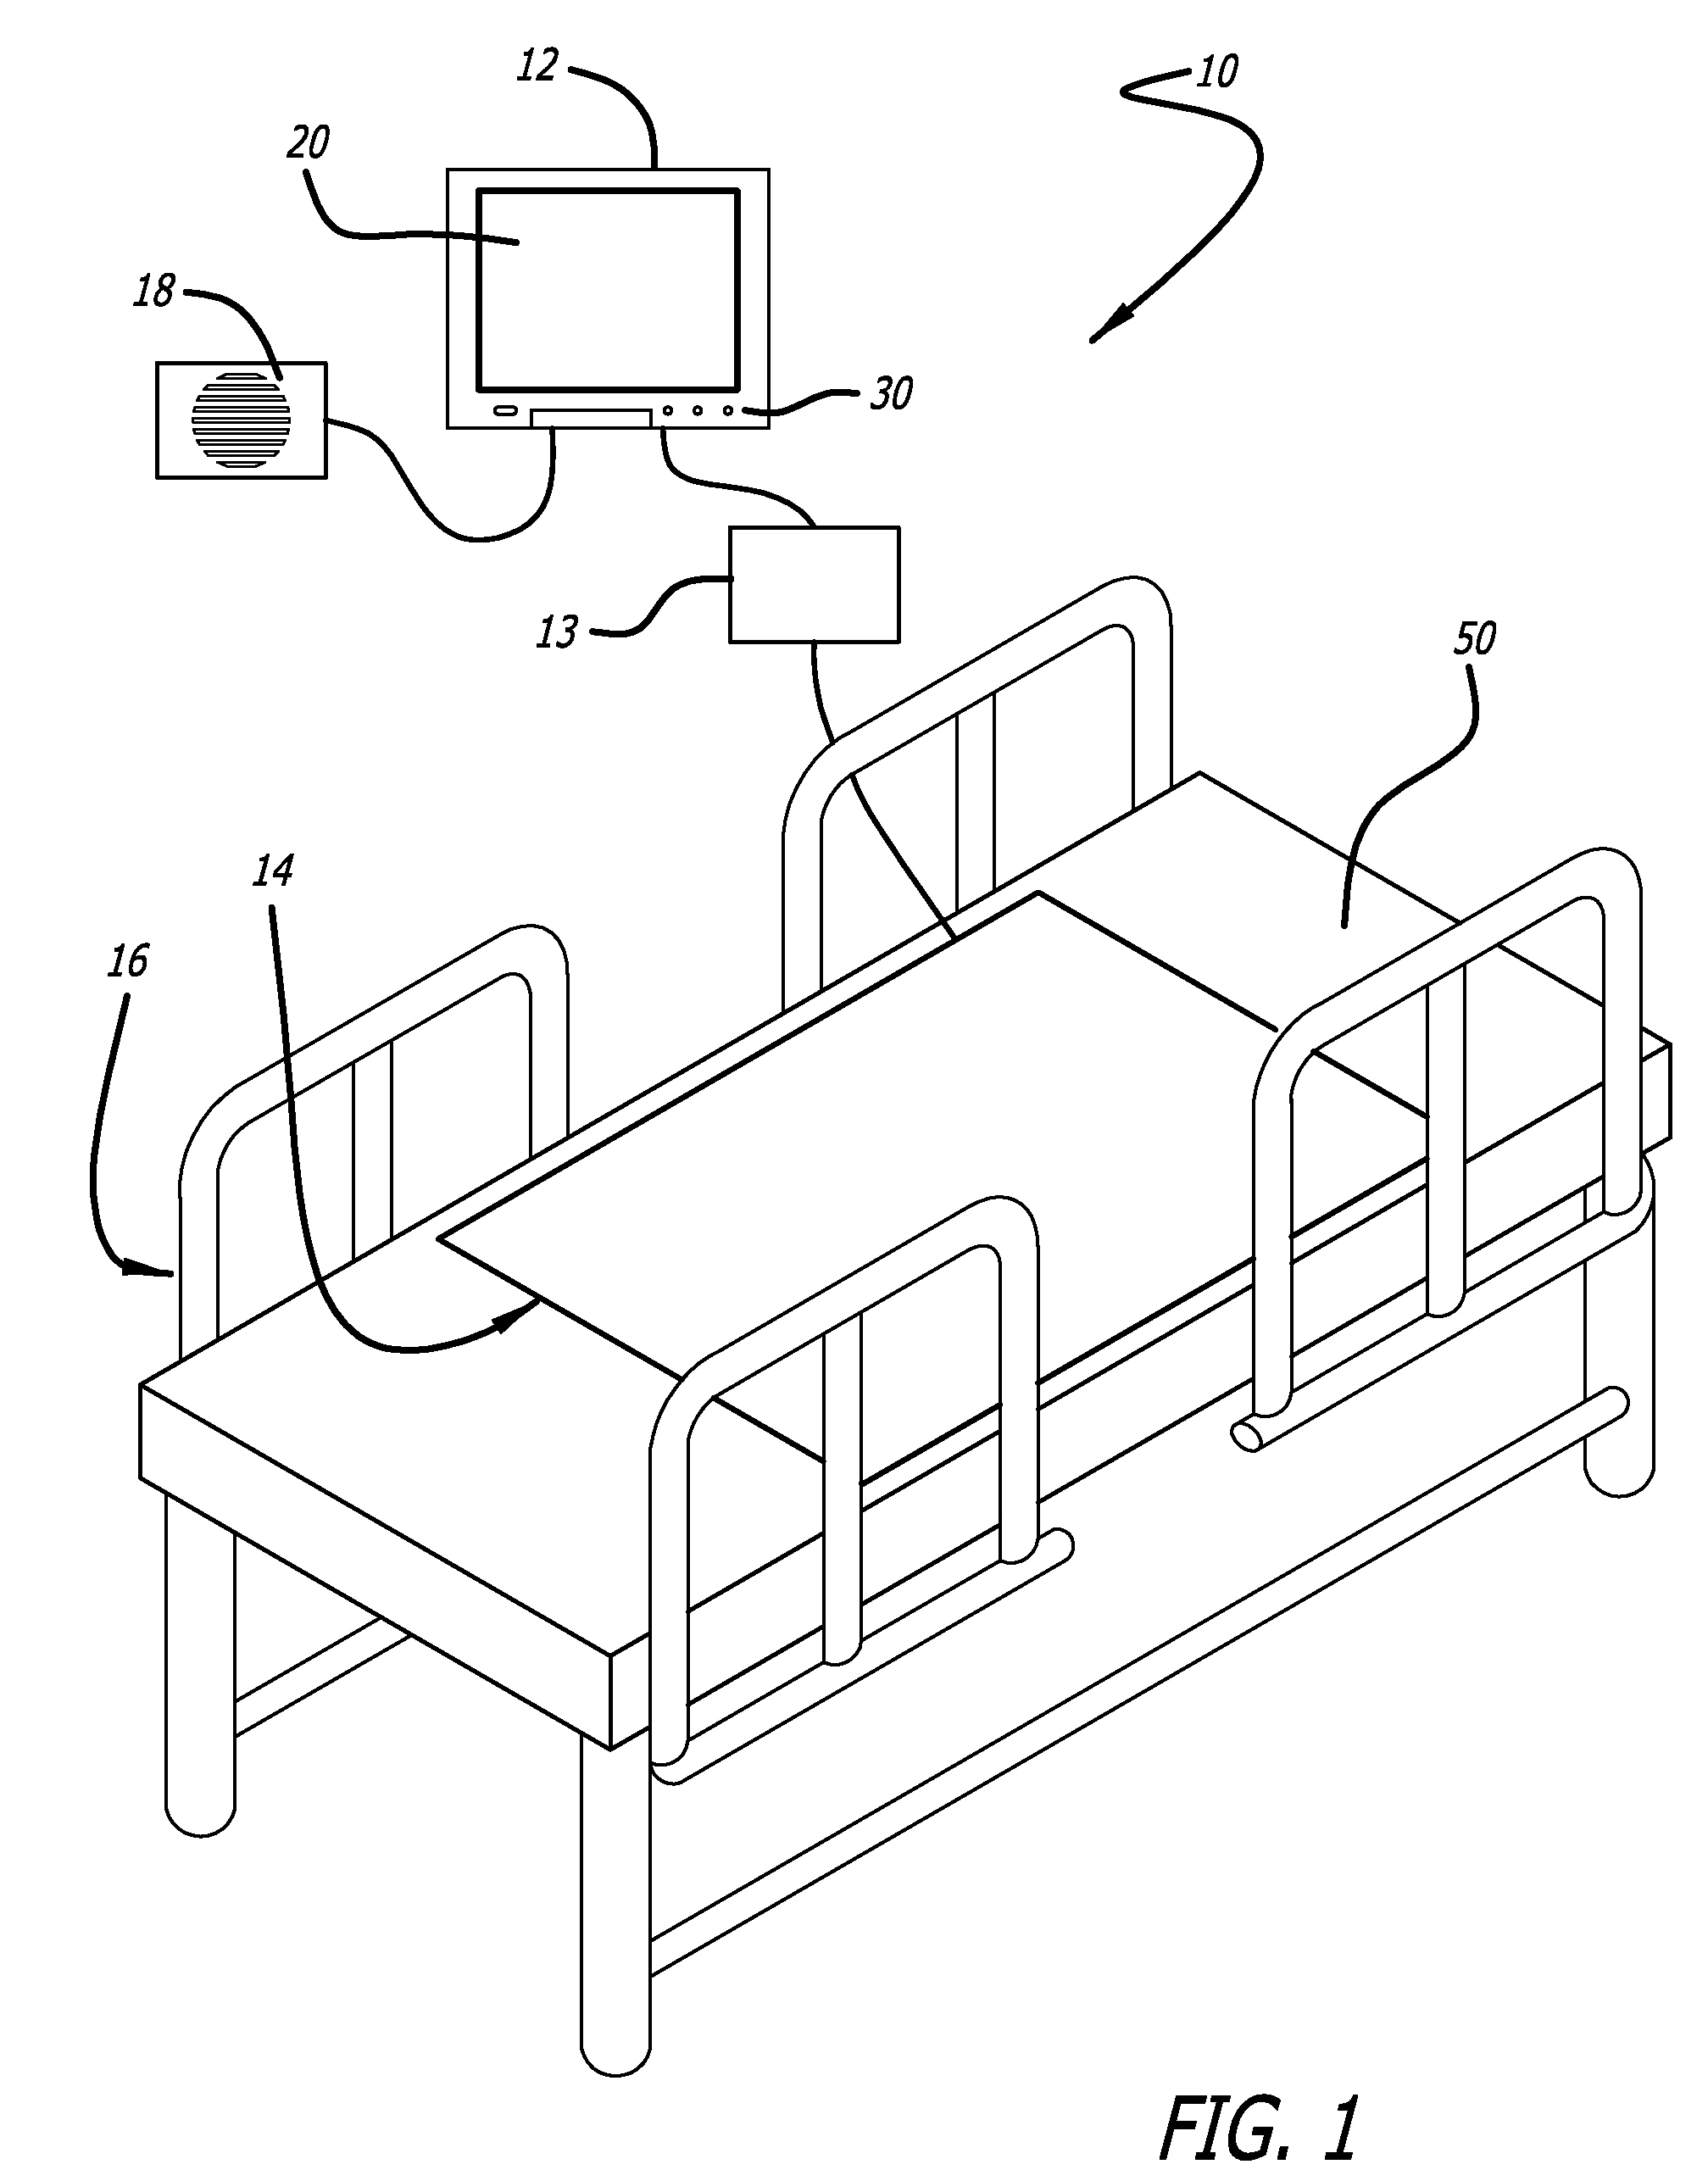 Bed exit and patient detection system